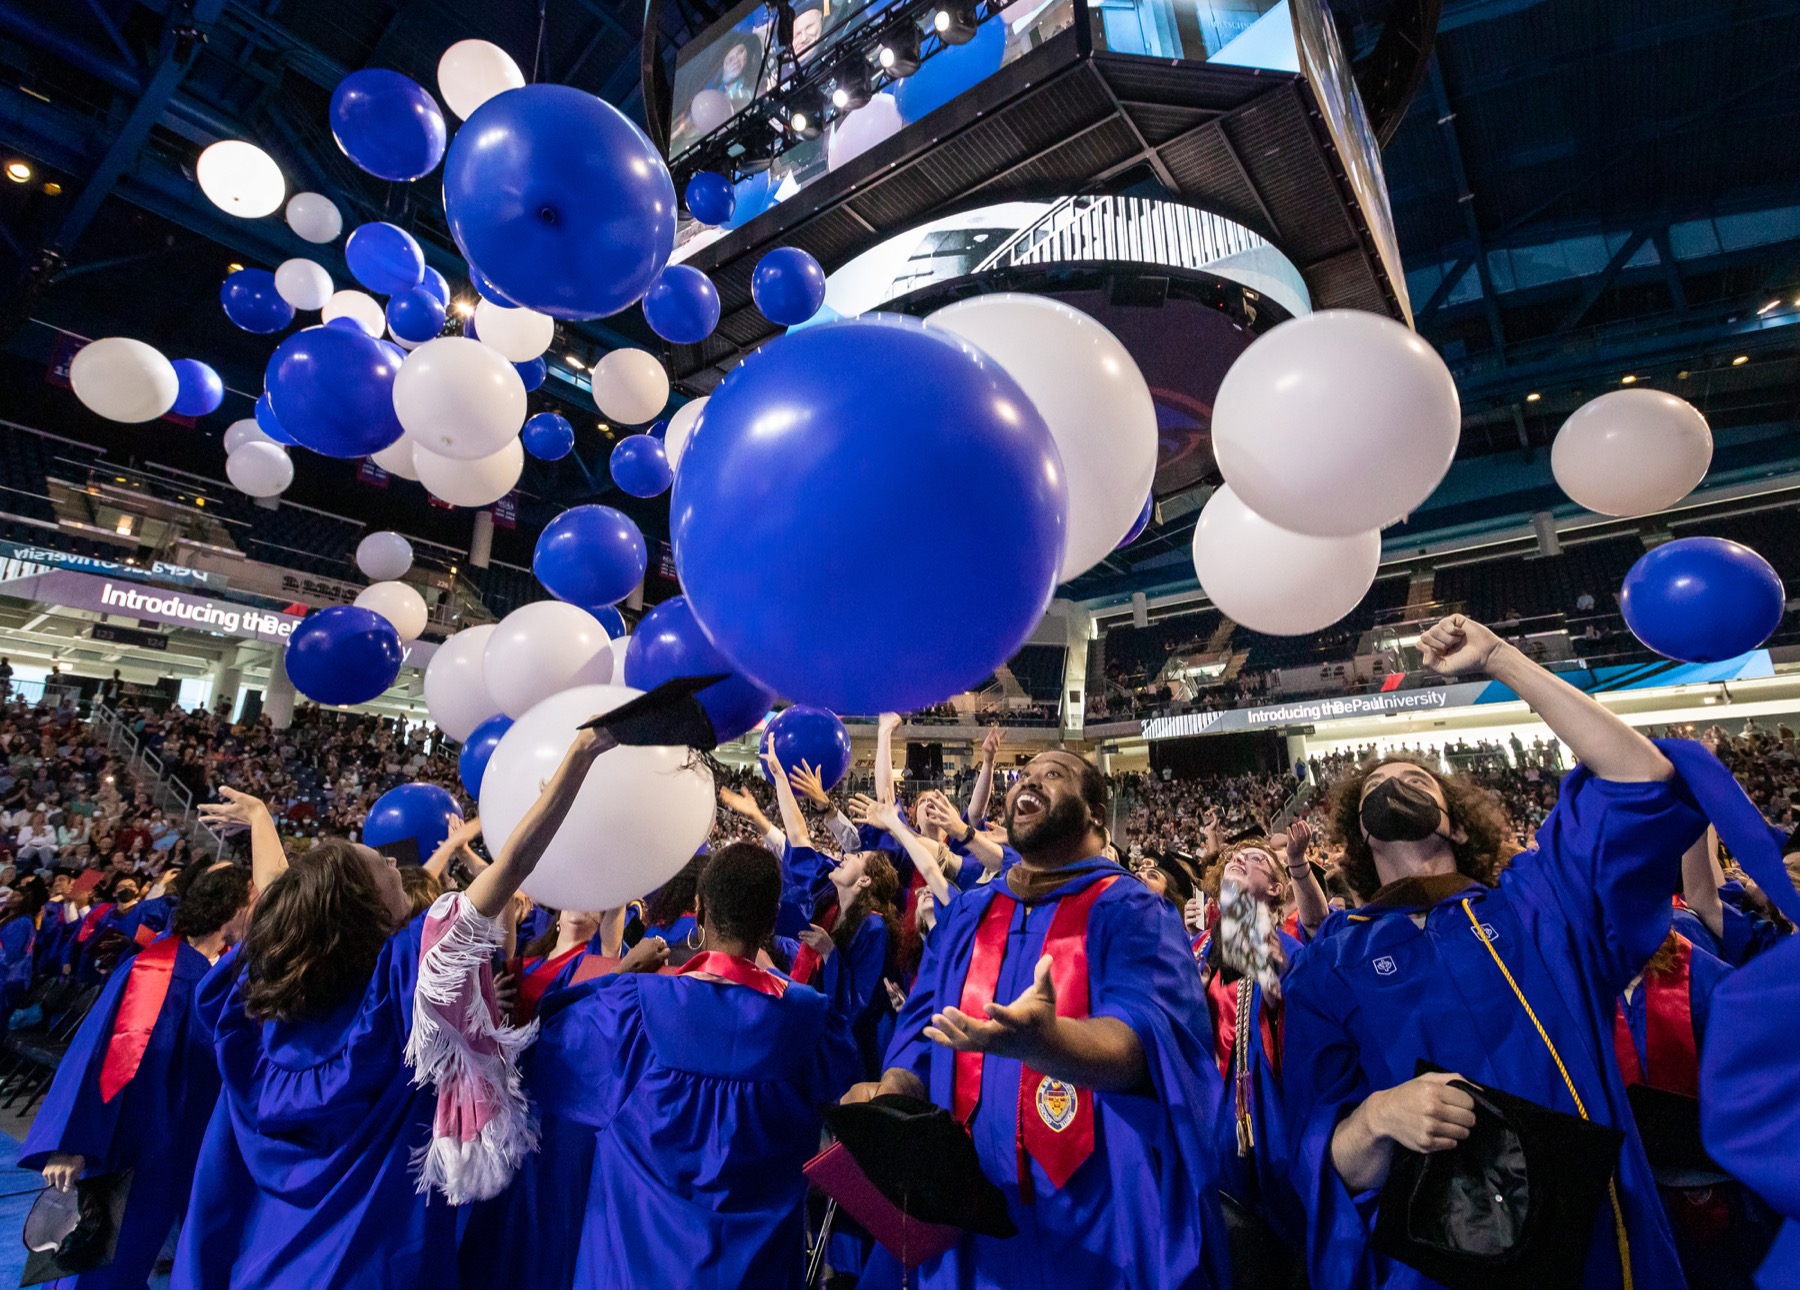 A suprise balloon drop marked the end of the commencement ceremony.